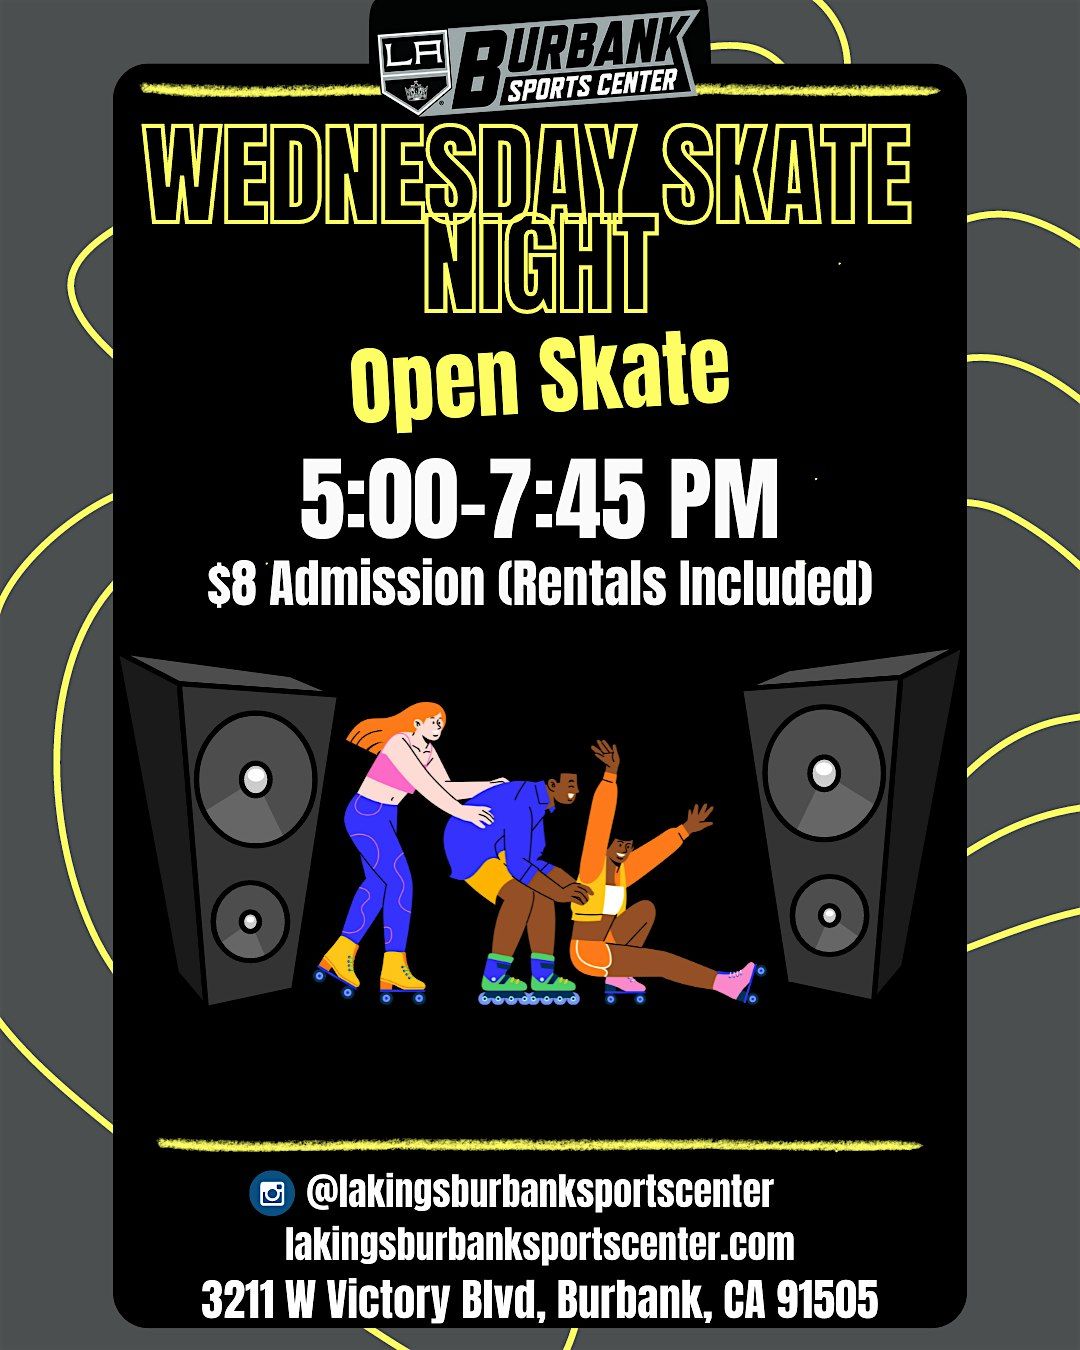 Wednesday Open Skate ($8 Admission - Rental Included)